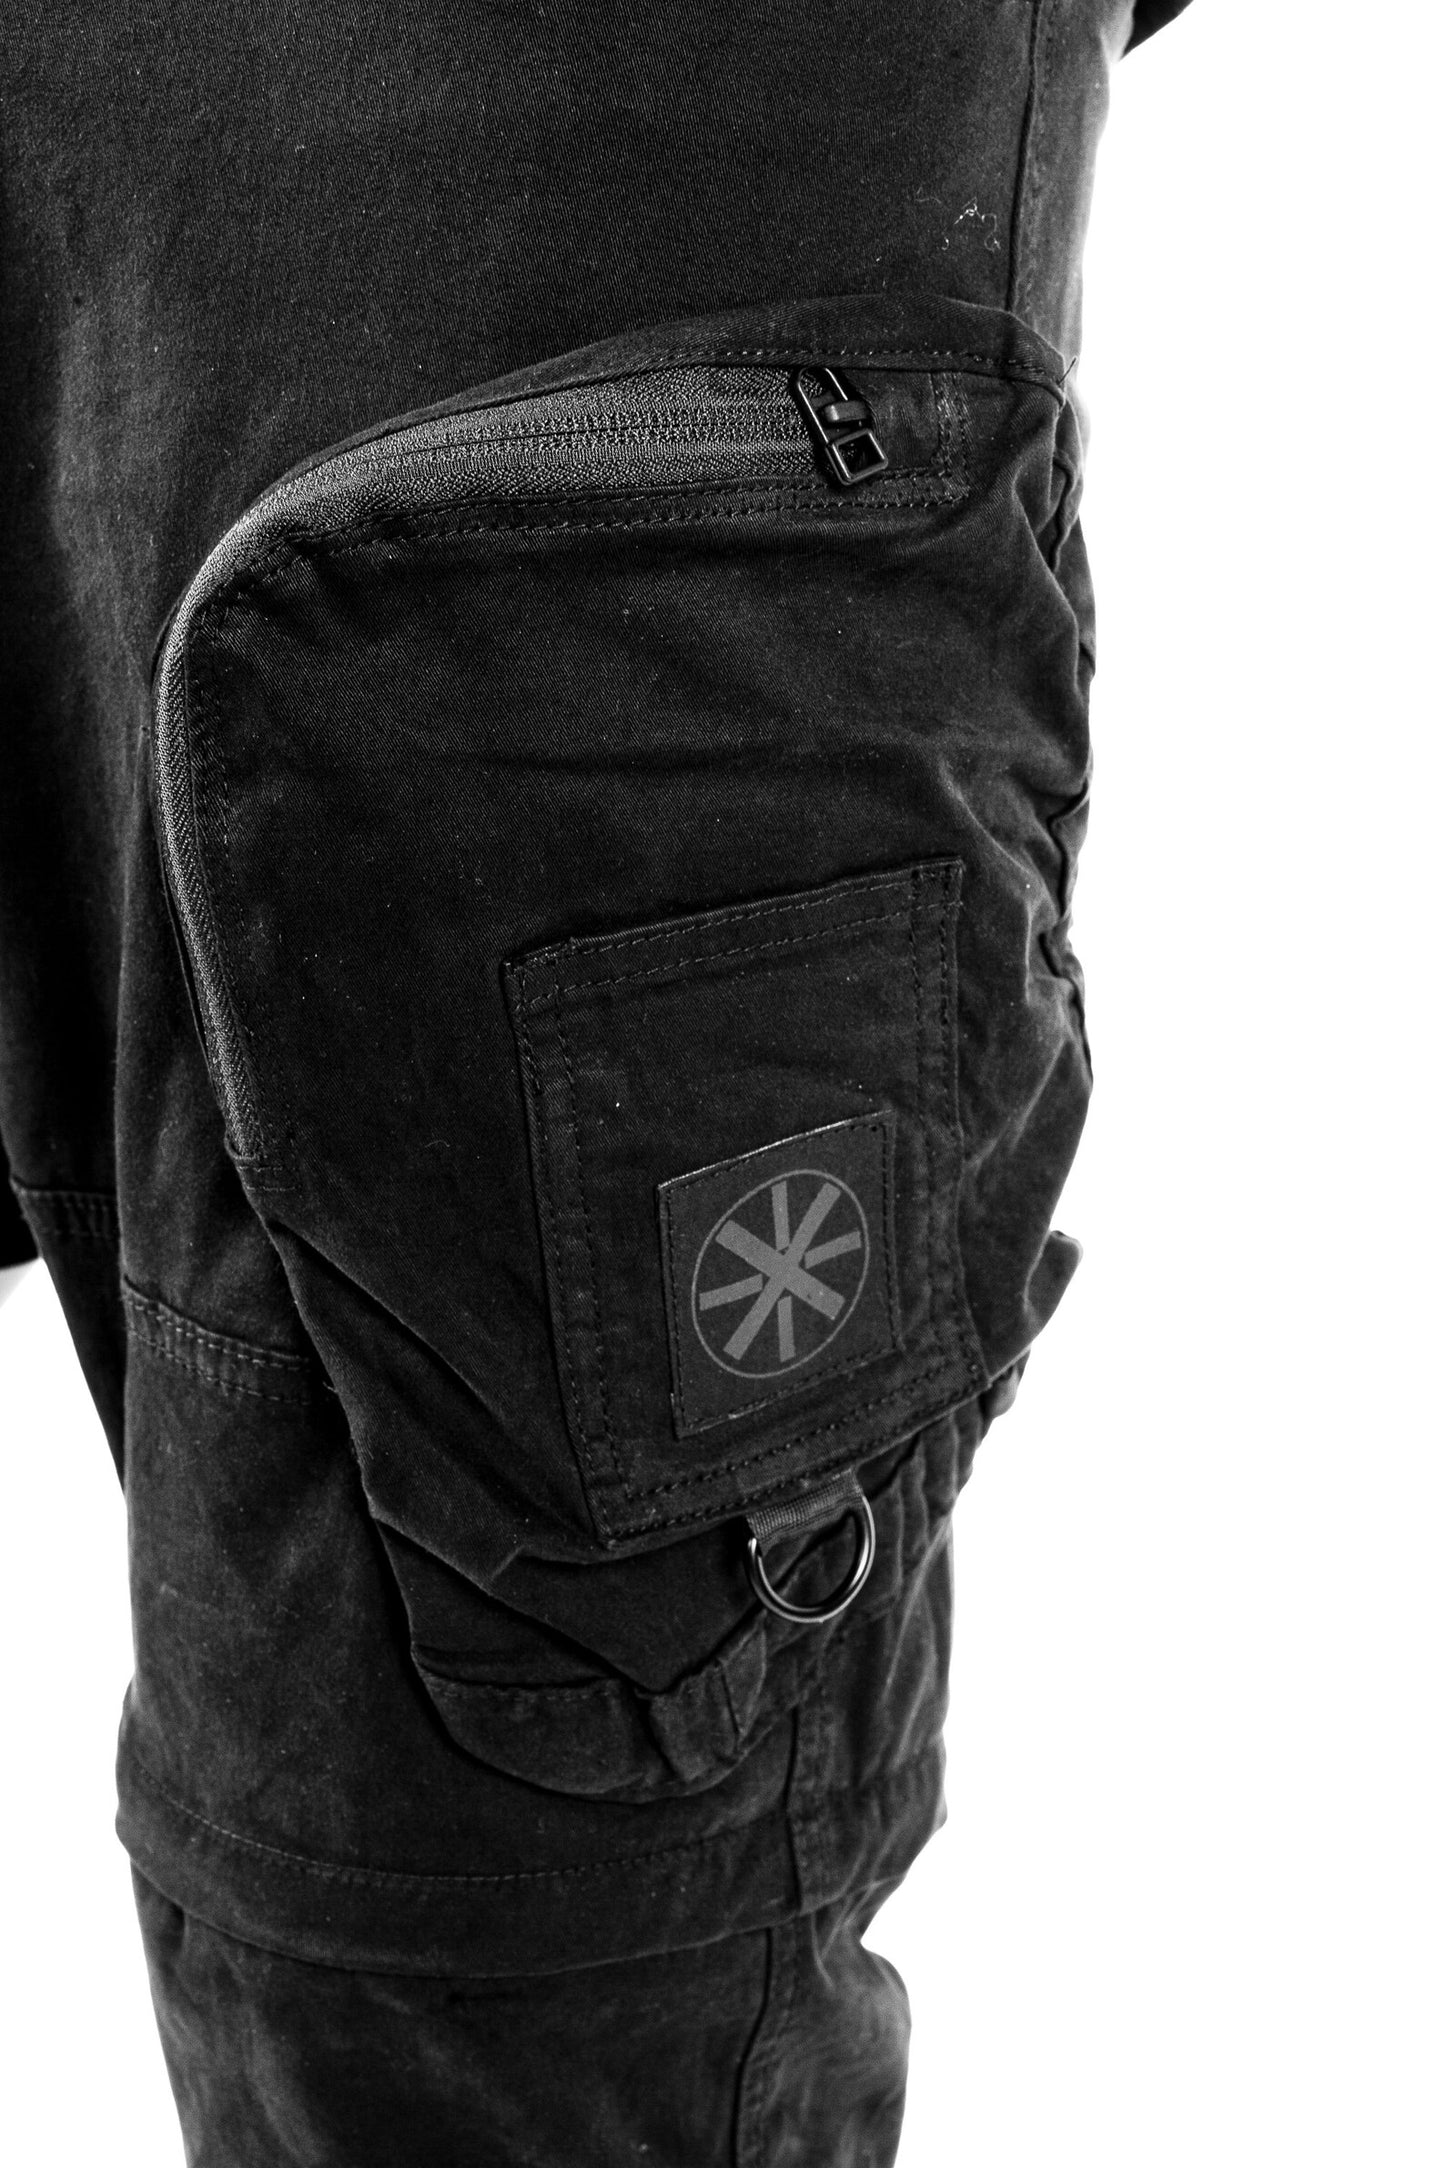 Tech 13 Cargo Pants and Zip Off Shorts